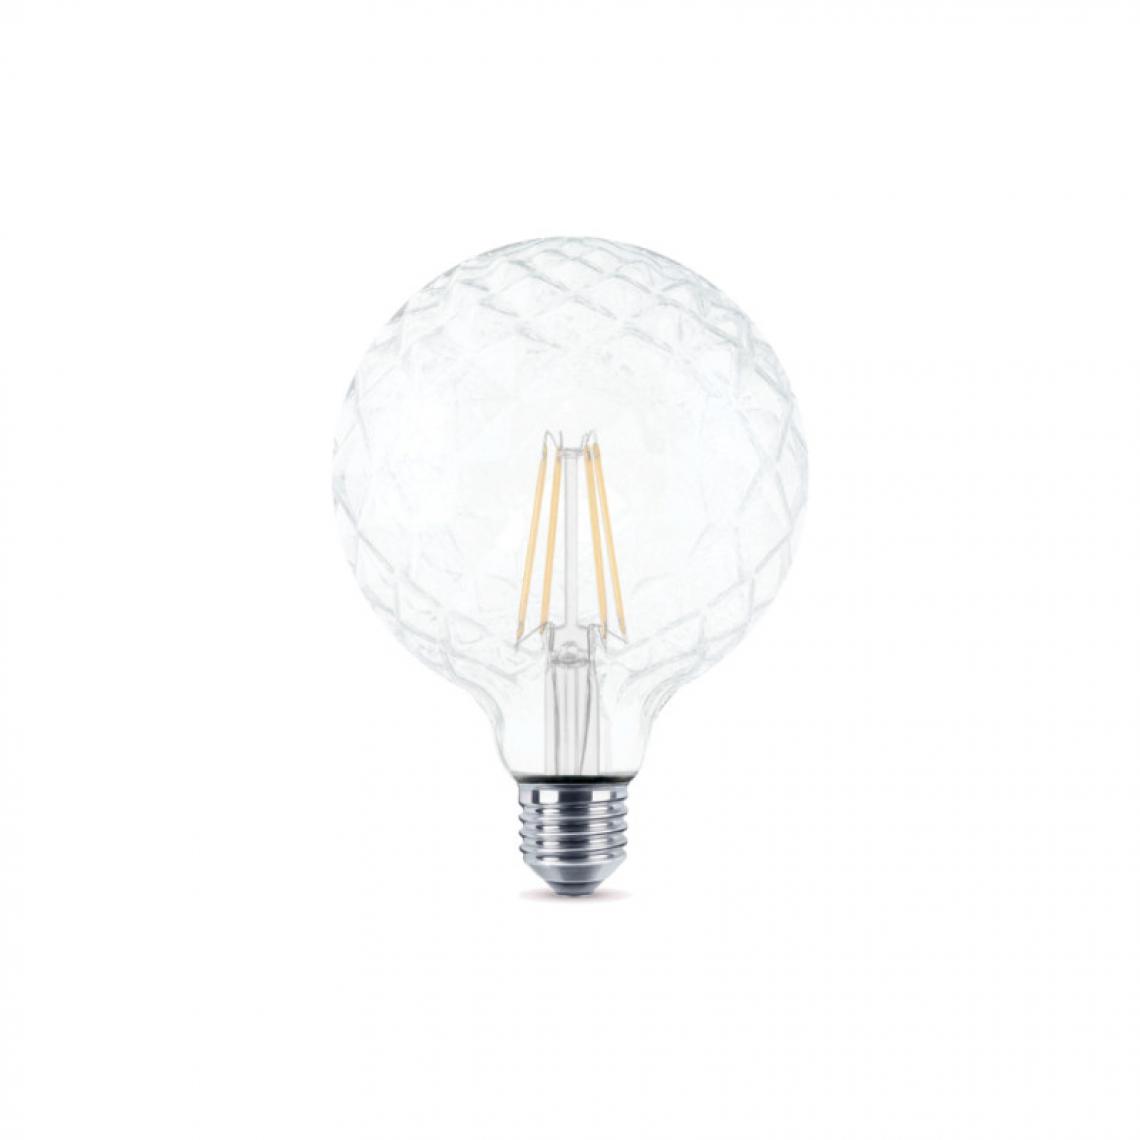 Xxcell - Ampoule LED ananas claire XXCELL - 4 W - 400 lumens - 2700 K - E27 - Ampoules LED